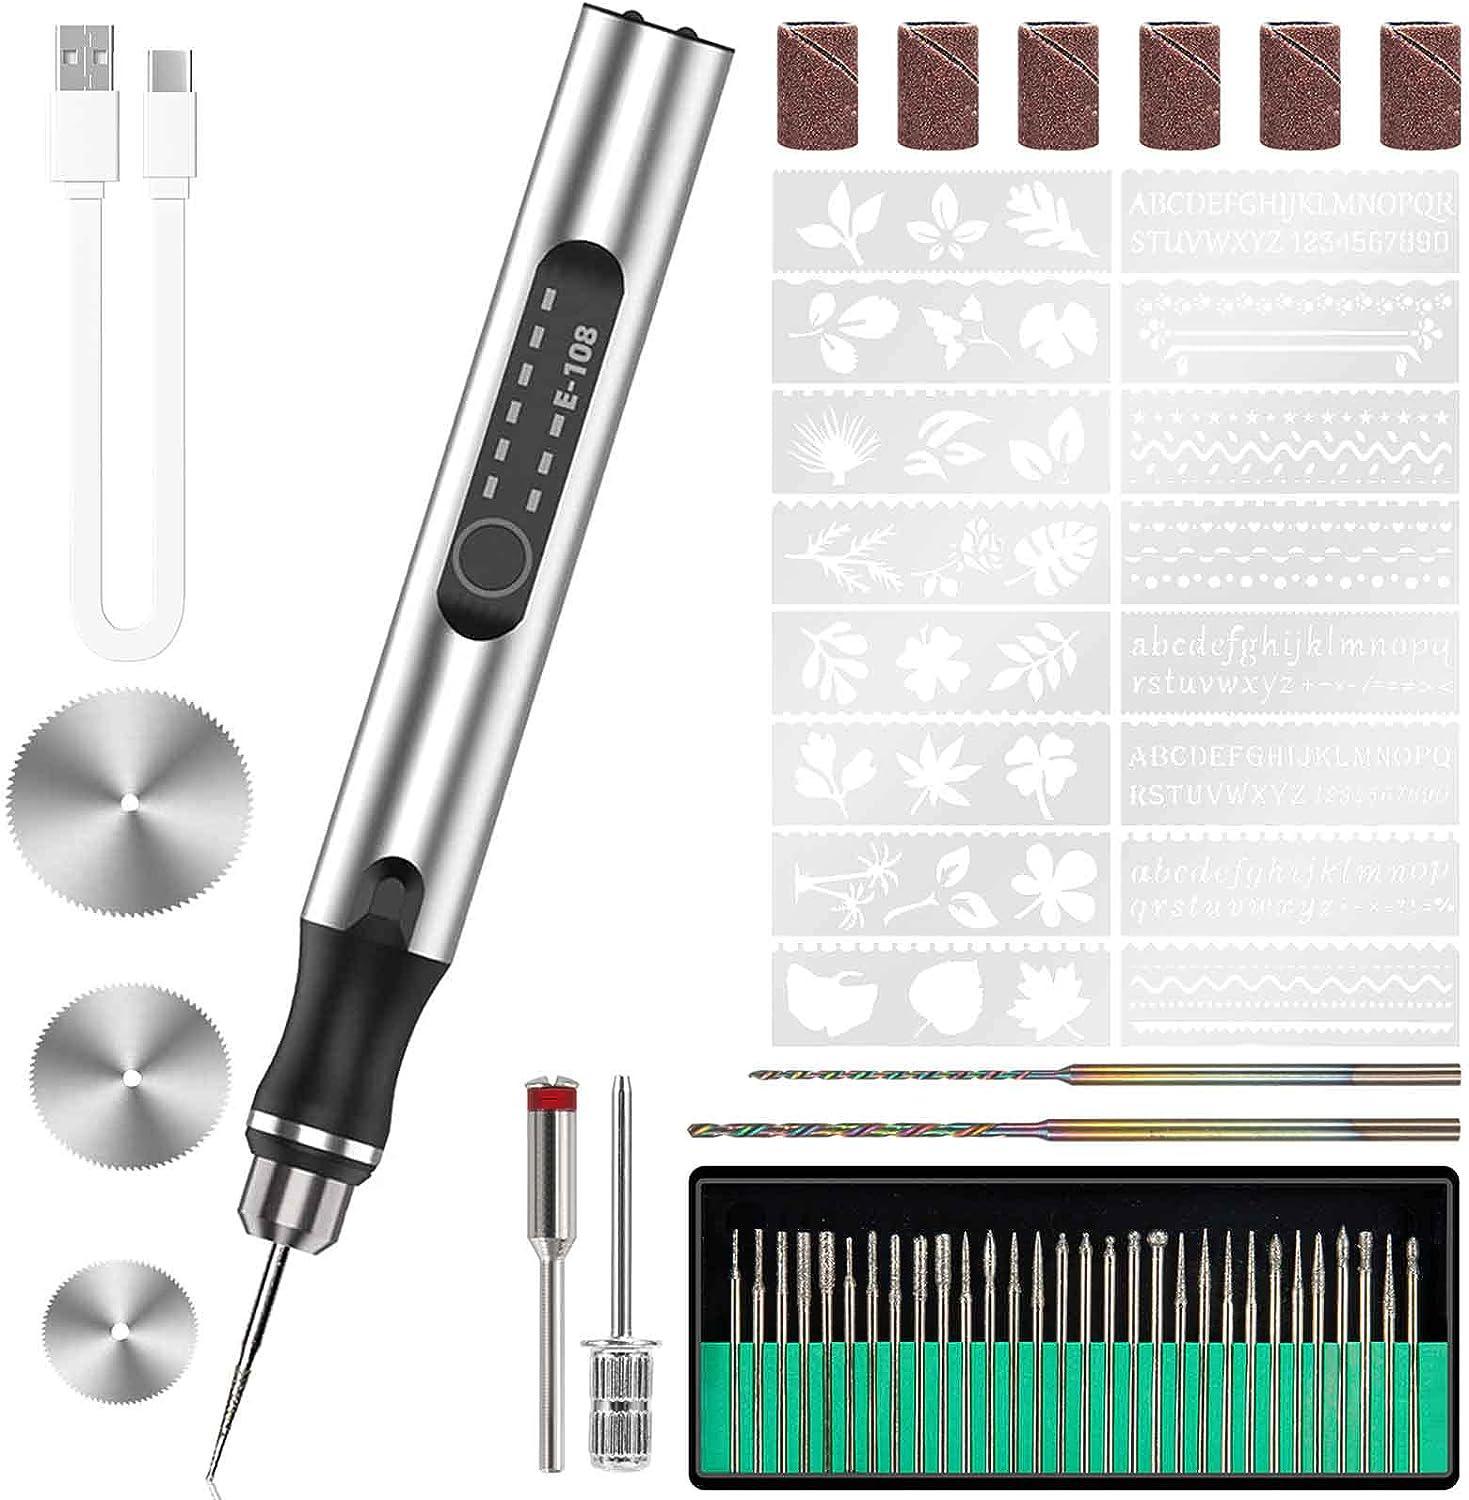  Engraving Pen Portable Electric Engraving Tool Kit,  Rechargeable Engraver Machine for Metal Glass Wood Leather Jewellery  Carving Drilling Lettering : Arts, Crafts & Sewing